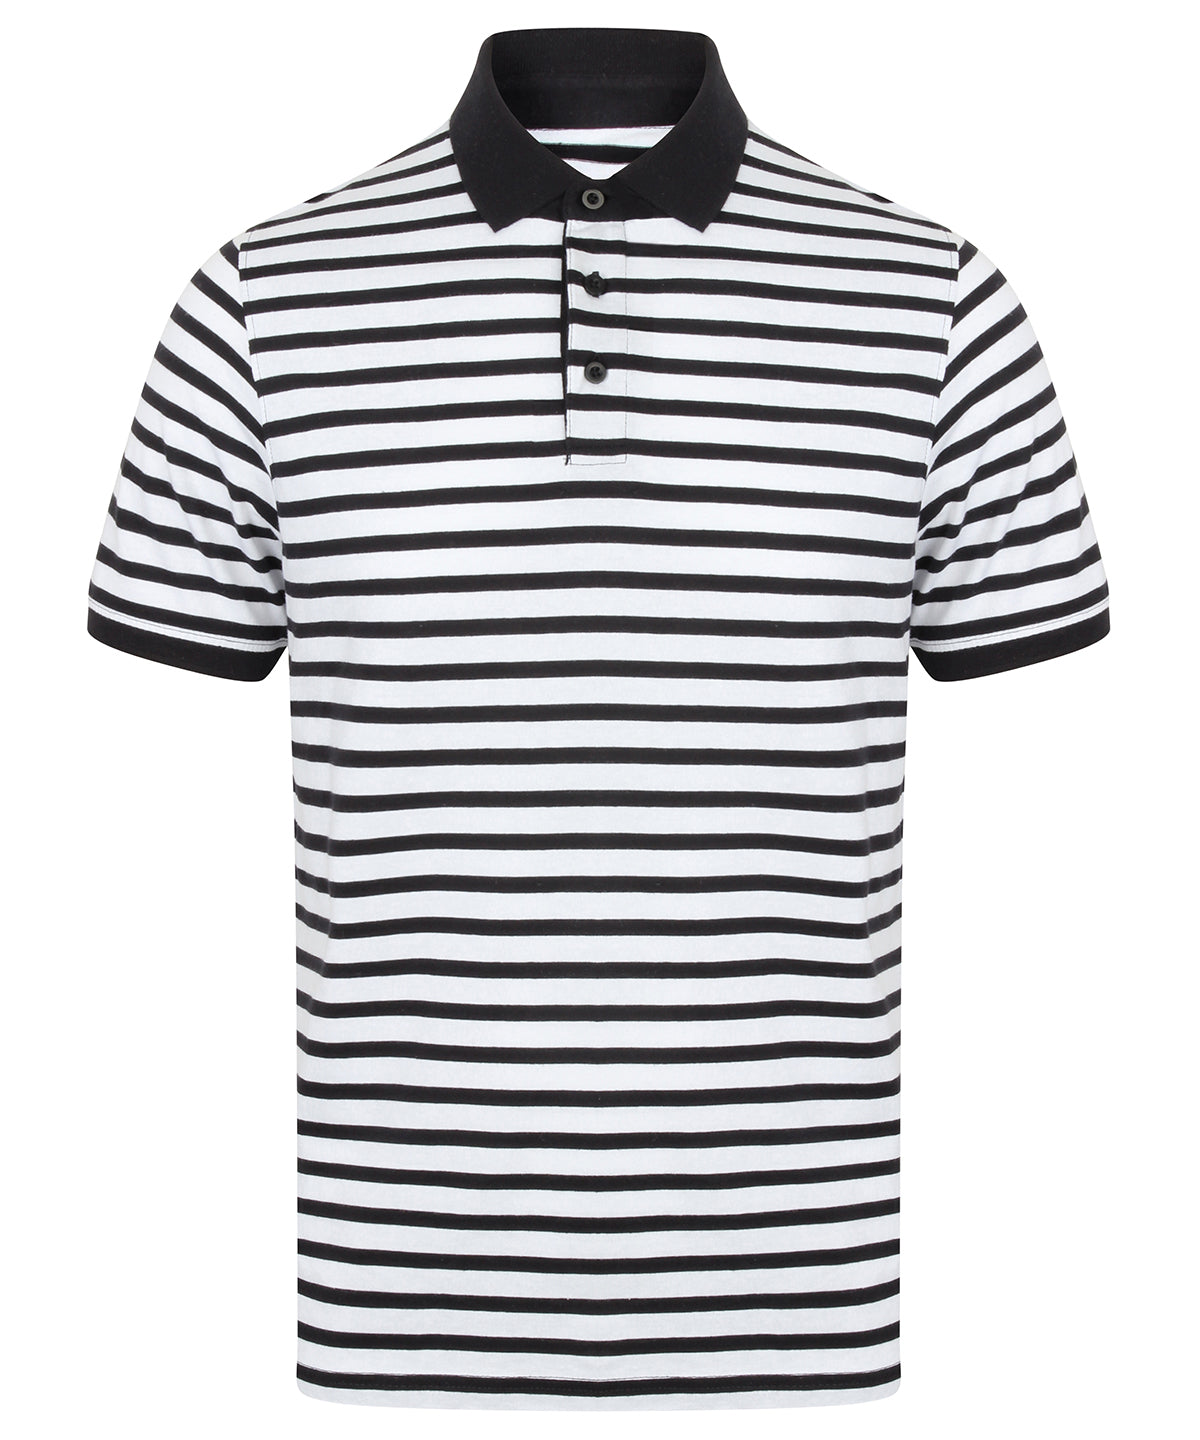 Personalised Polo Shirts - Stripes Front Row Striped Jersey polo shirt